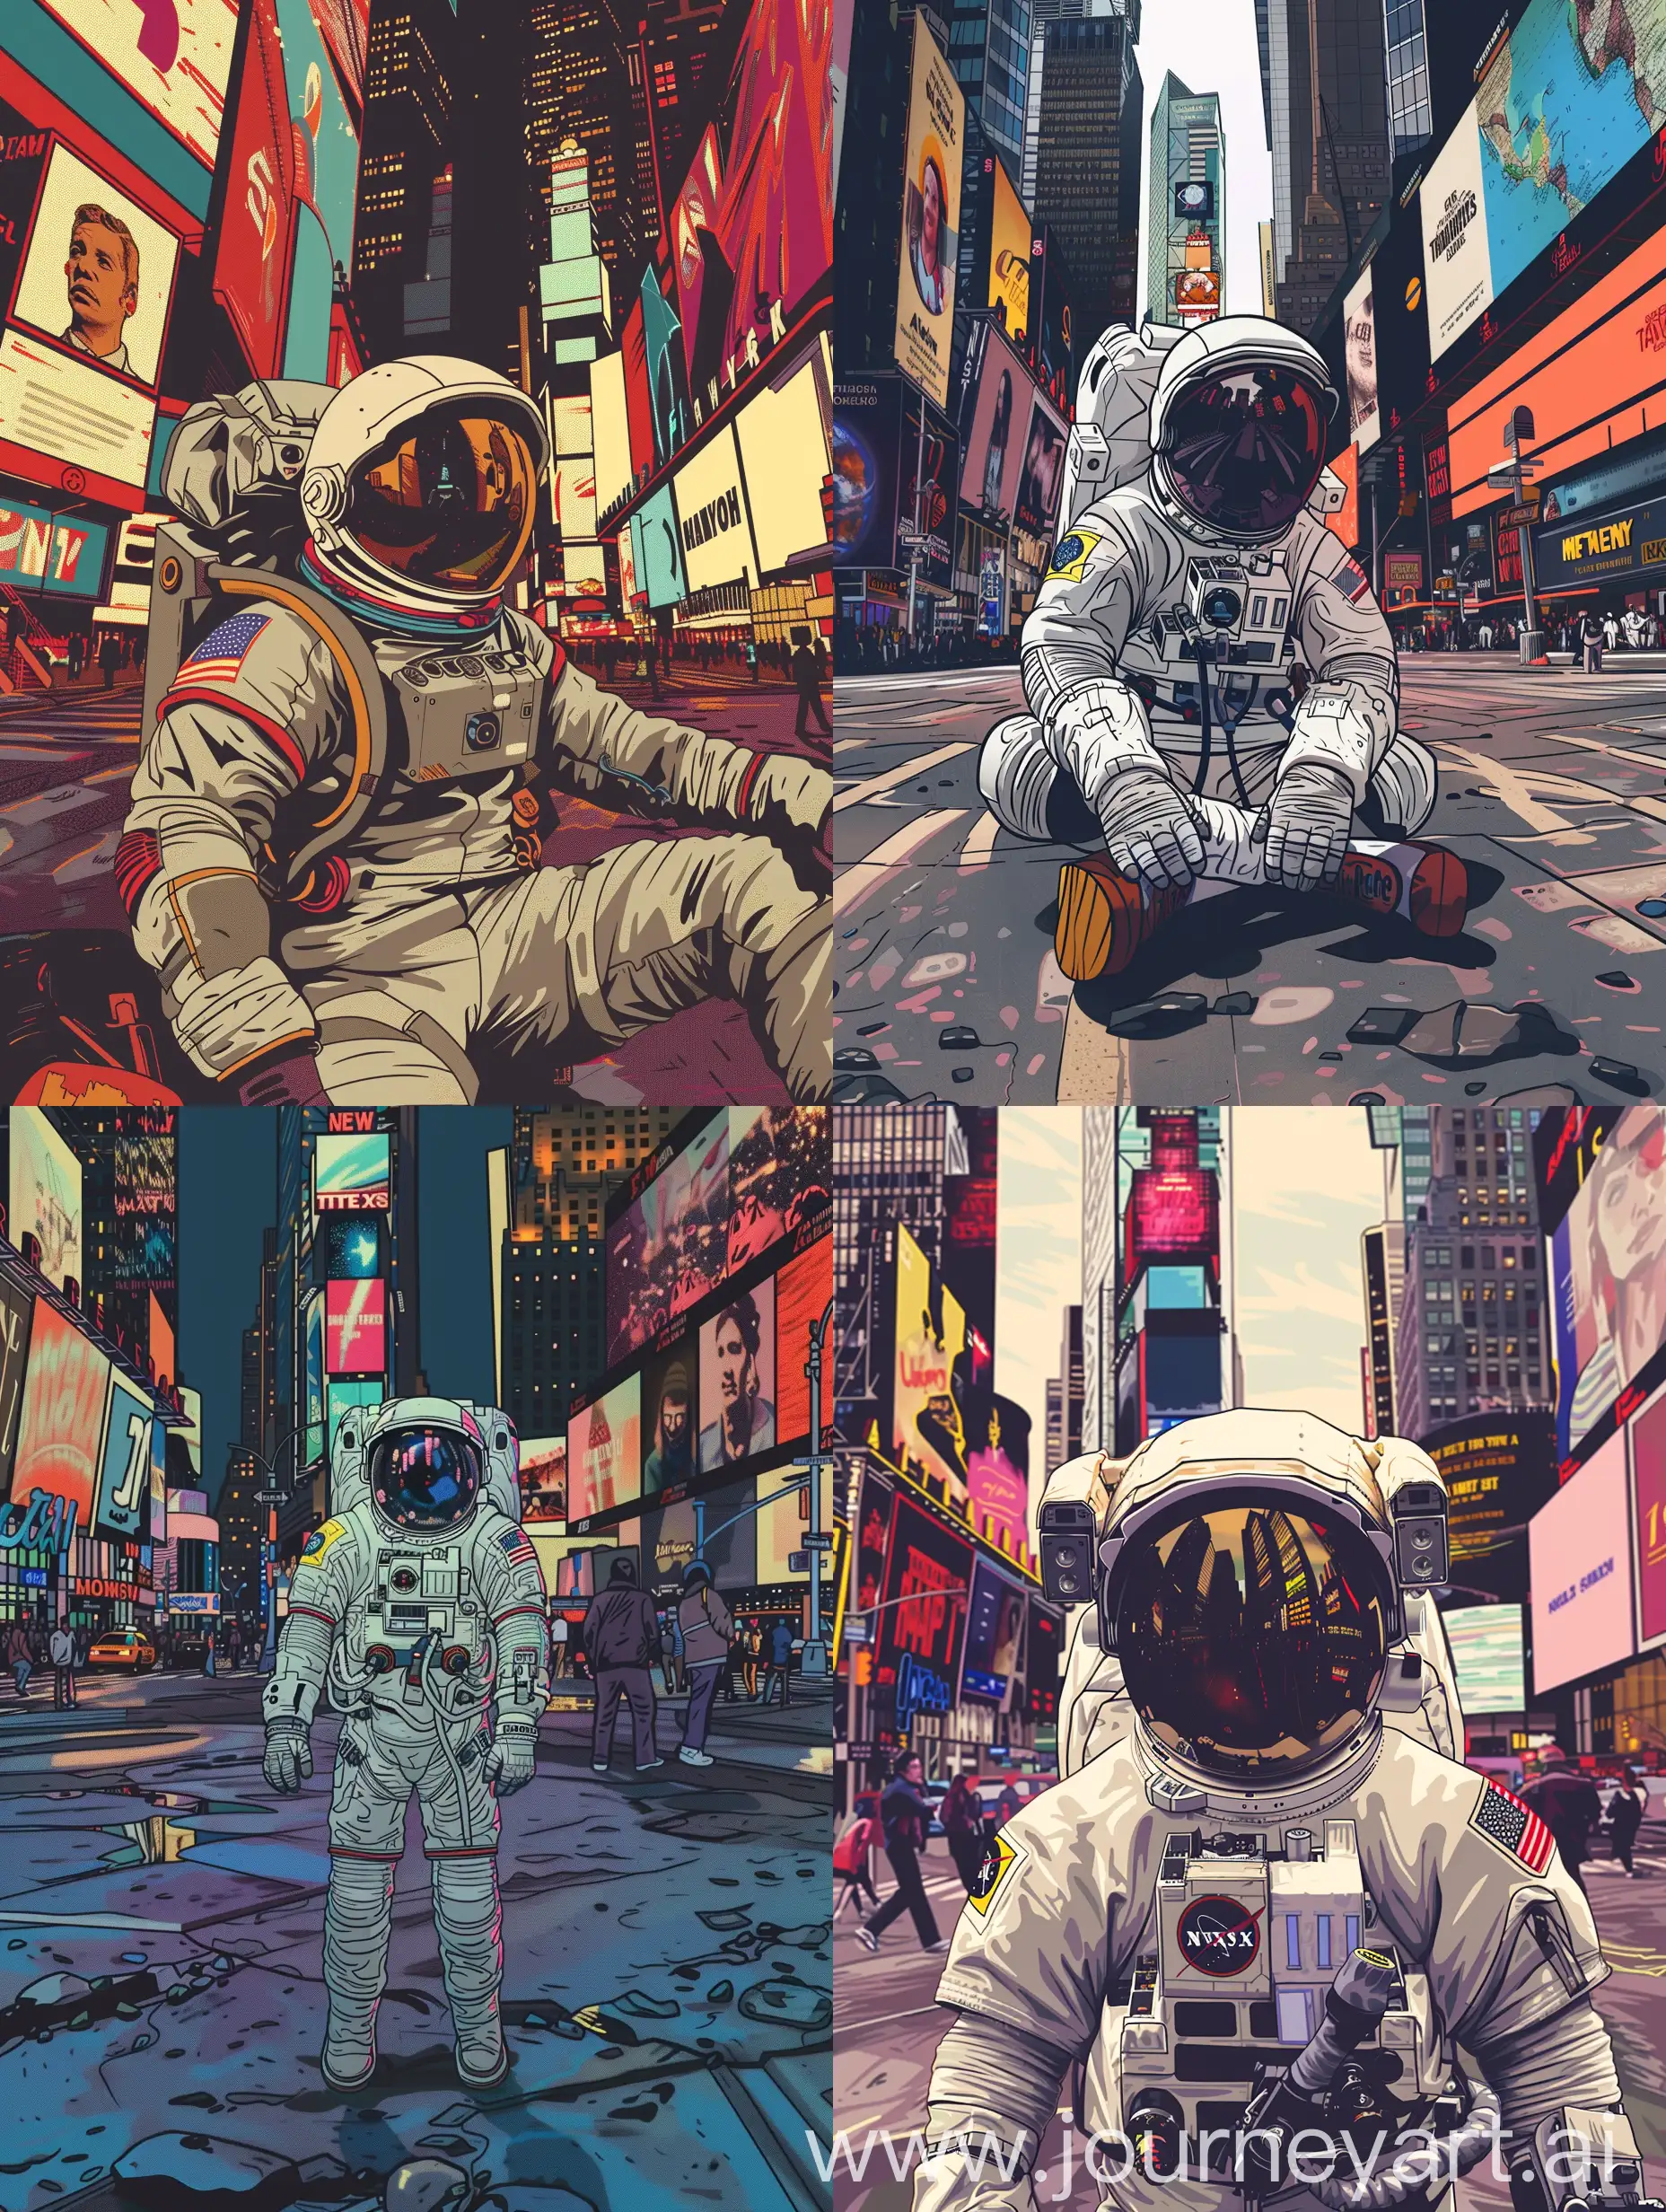  An astronaut lost in the bustling Times Square, New York, surrounded by the energy of the city, capturing the astronaut's sense of isolation and wonder in the midst of the urban jungle, Vector illustration, clean lines and vivid colors